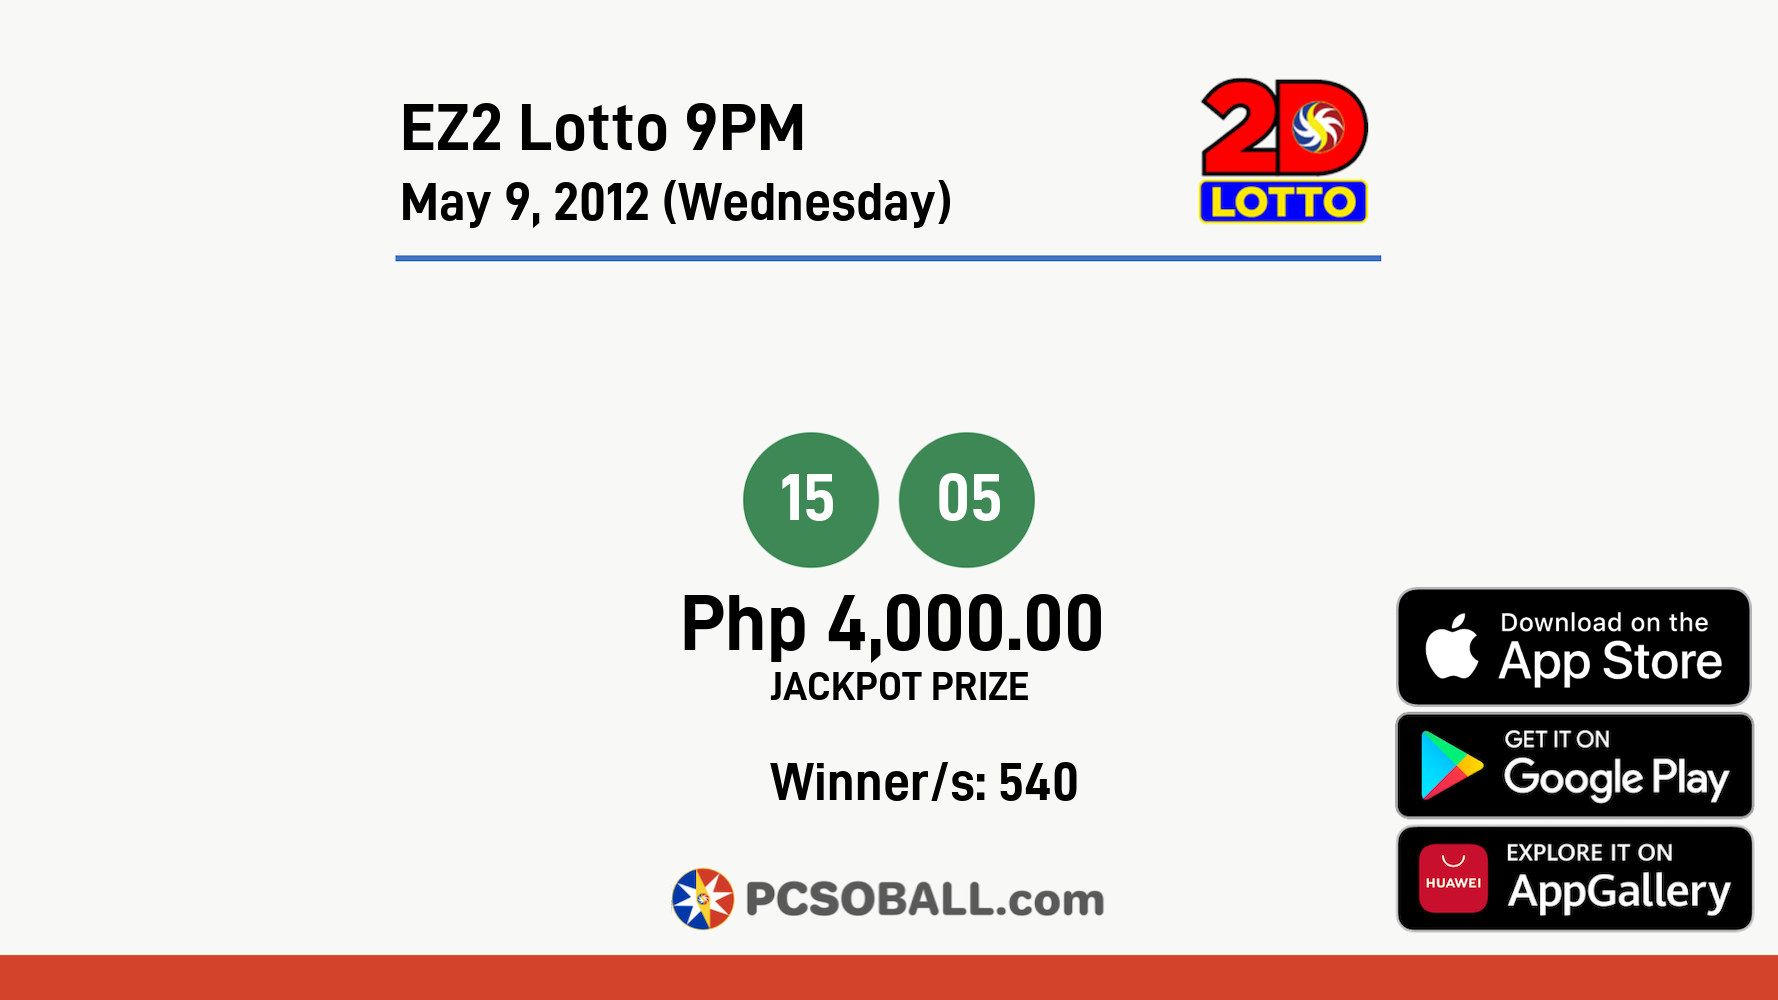 EZ2 Lotto 9PM May 9, 2012 (Wednesday) Result